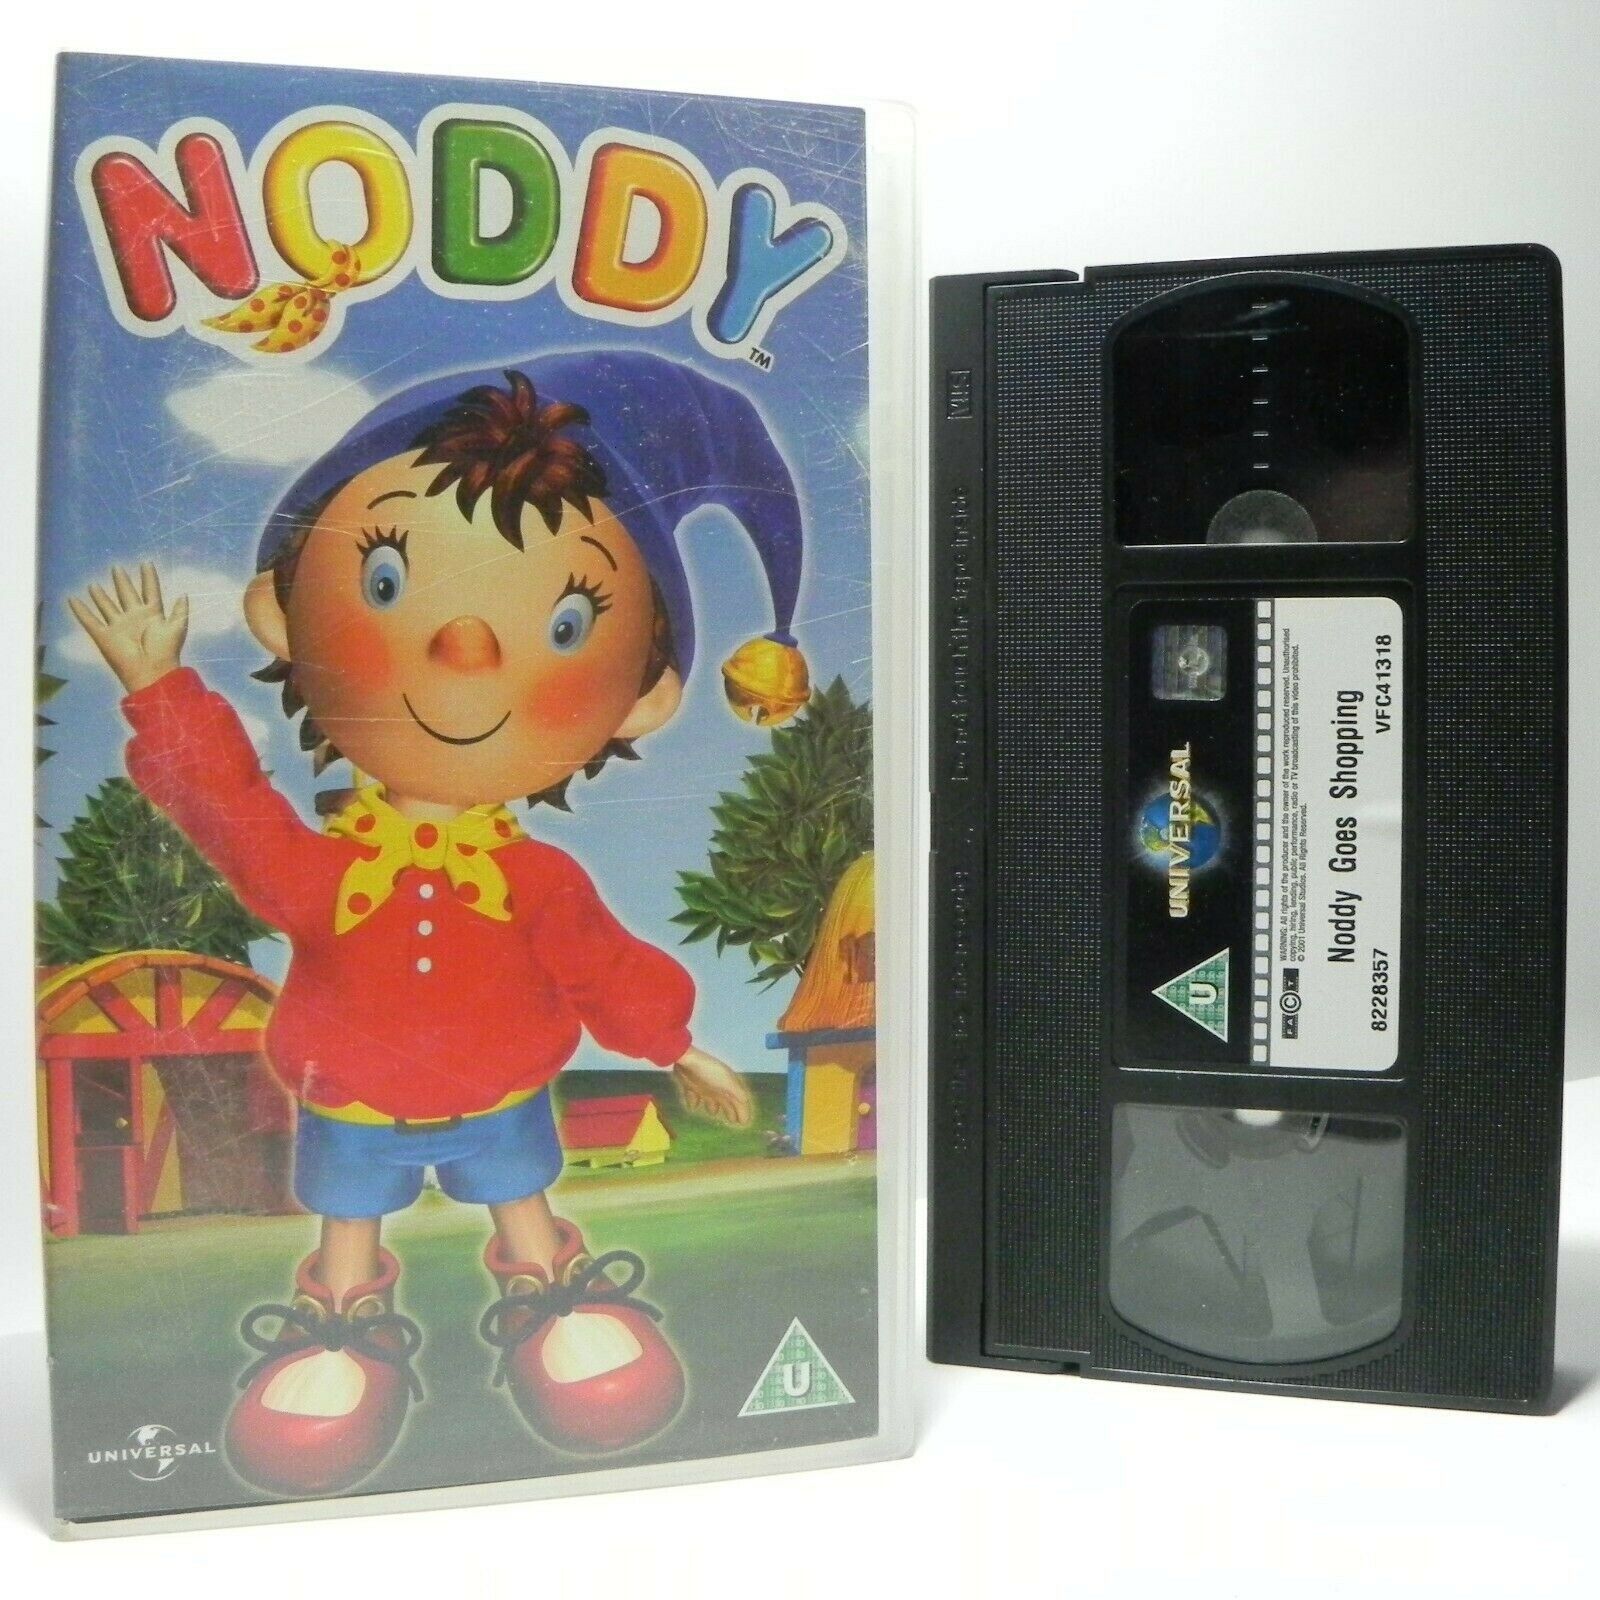 Noddy: Noddy Goes Shopping - Two Episodes - Classic Animation - Kids - Pal VHS-